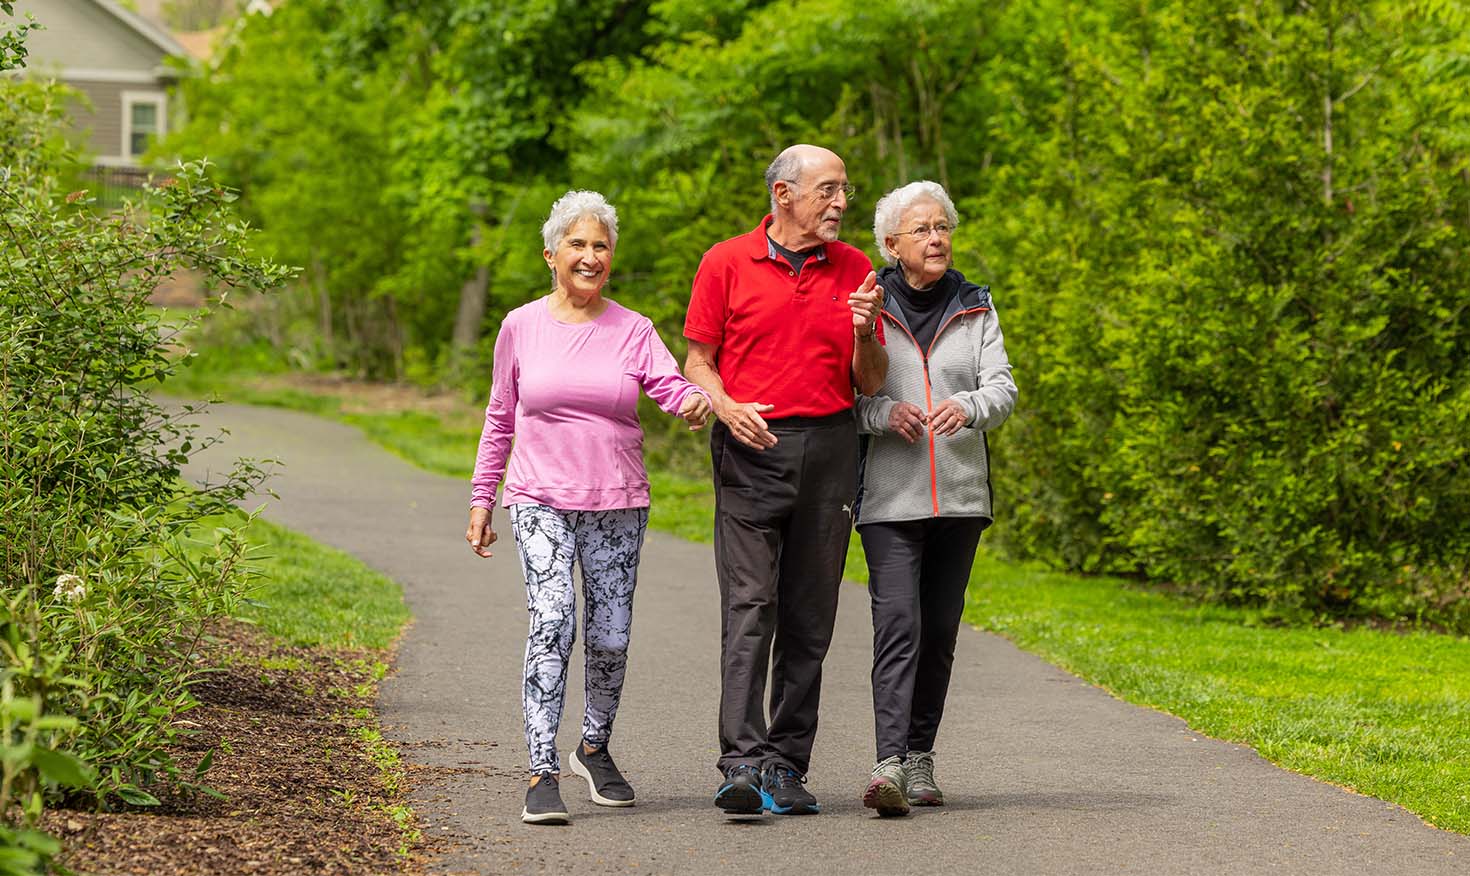 Two senior women and a senior man walking on a paved path